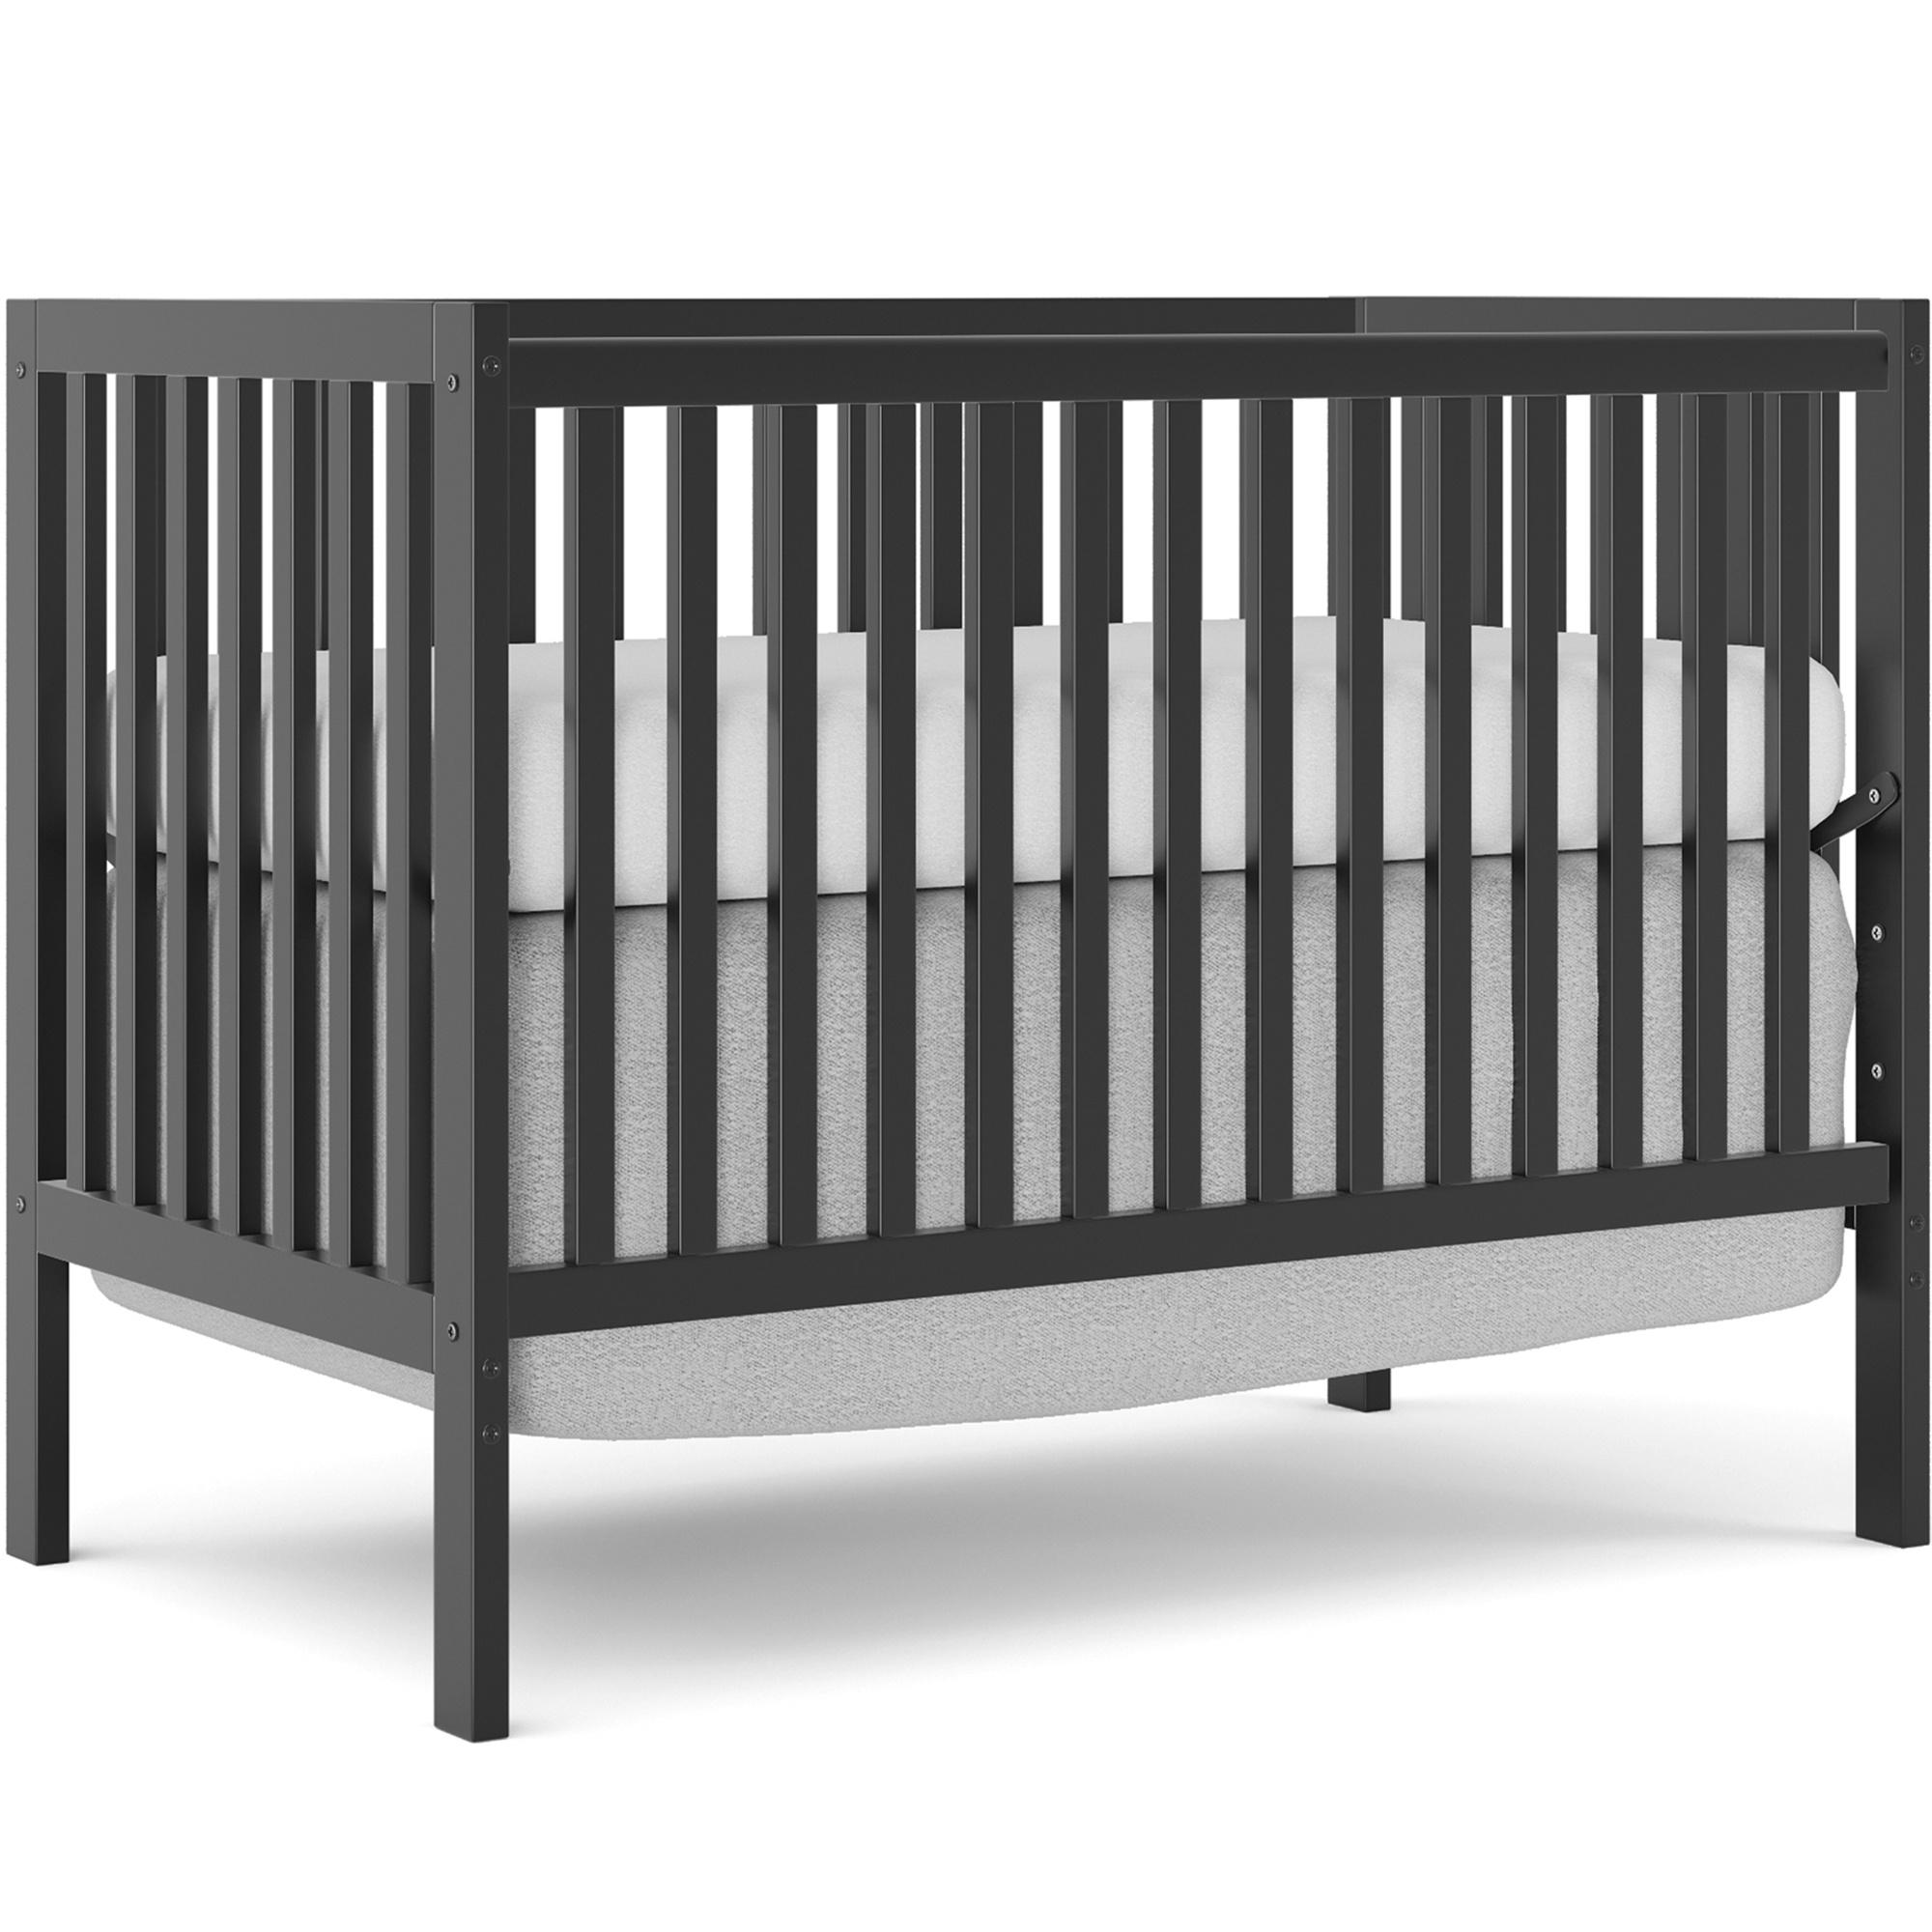 HSUNNS 5-in-1 Convertible Crib, Baby Crib with Slats, Certified Baby Safe Crib, Converts from Baby Crib to Toddler Bed, Easy Assembly, 3 Adjustable Heights, Black - image 2 of 8